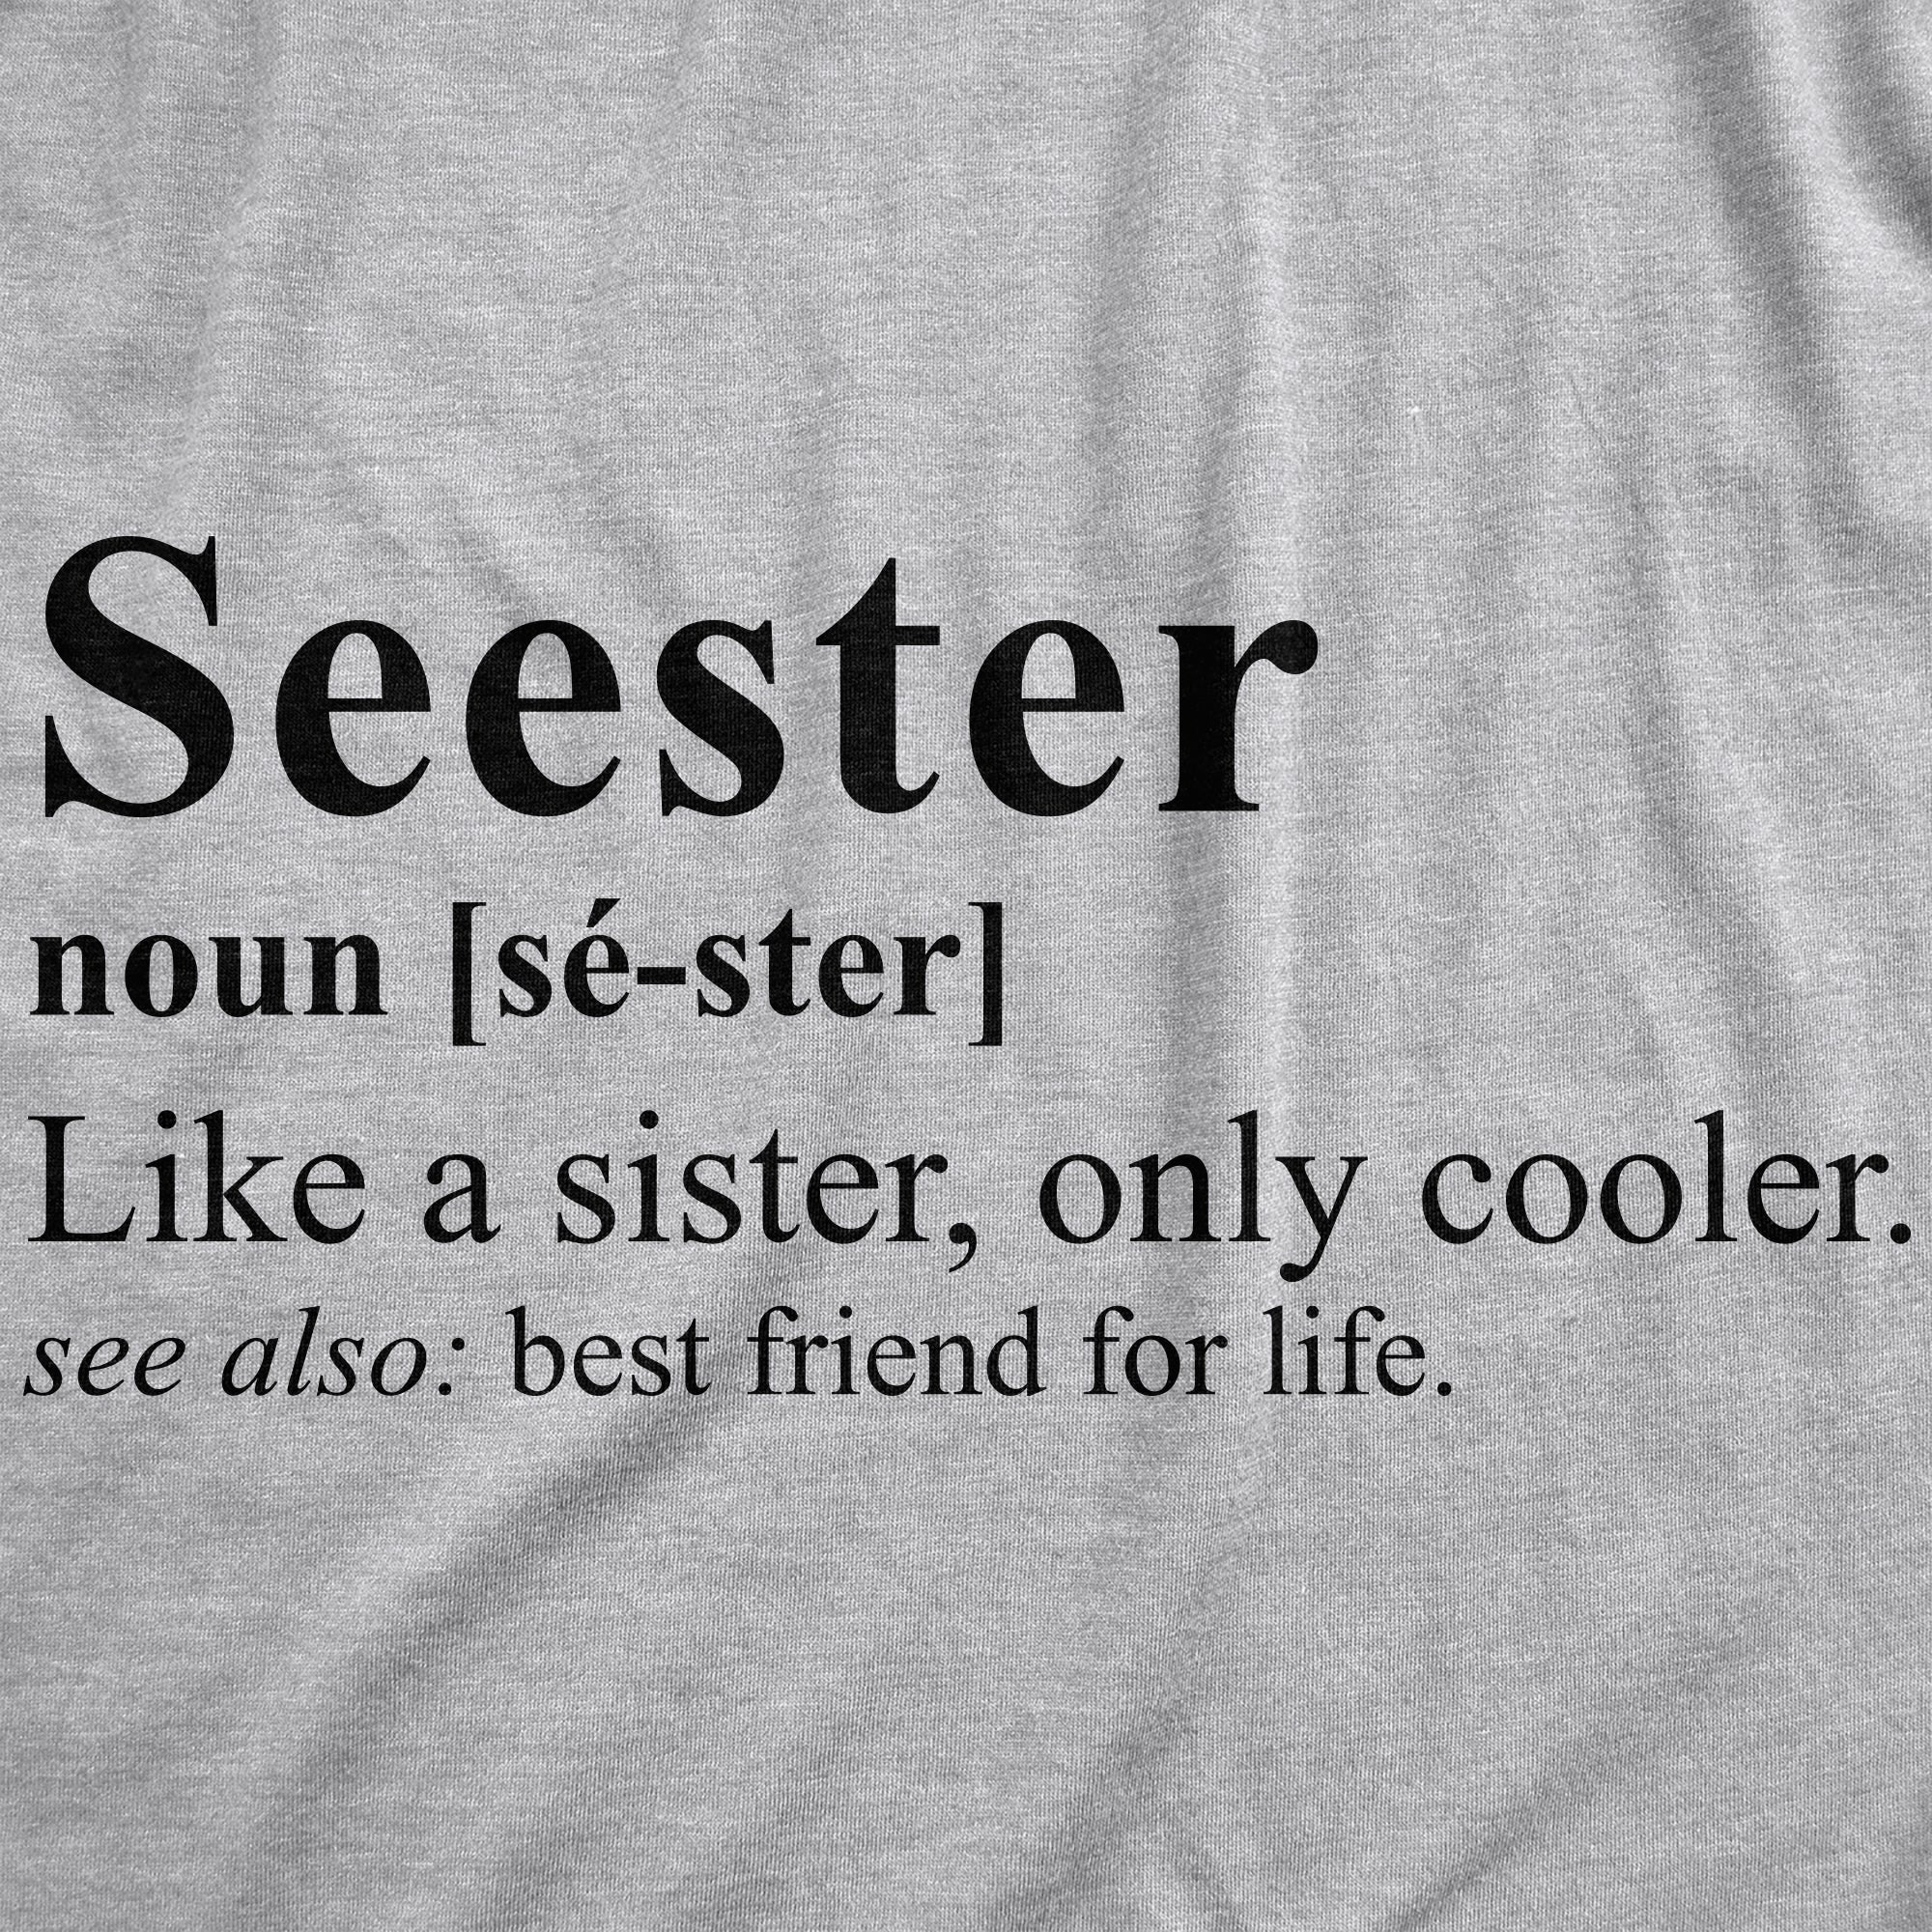 Funny Light Heather Grey - Seester Seester Womens T Shirt Nerdy Sister sarcastic Tee